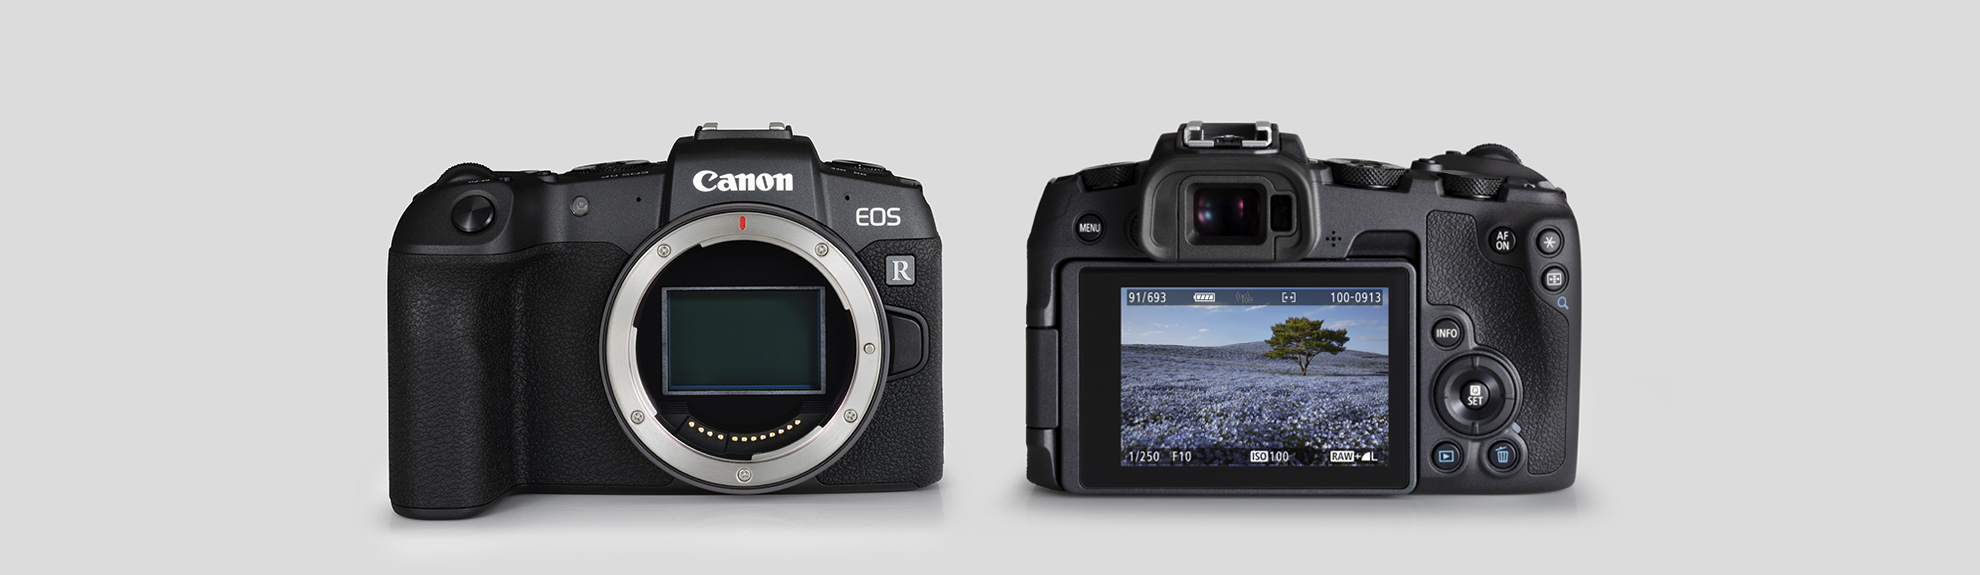 Canon RP product image of the camera body front and the camera body back showing the menu screen with an image of a field of violet flowers and a single green tree